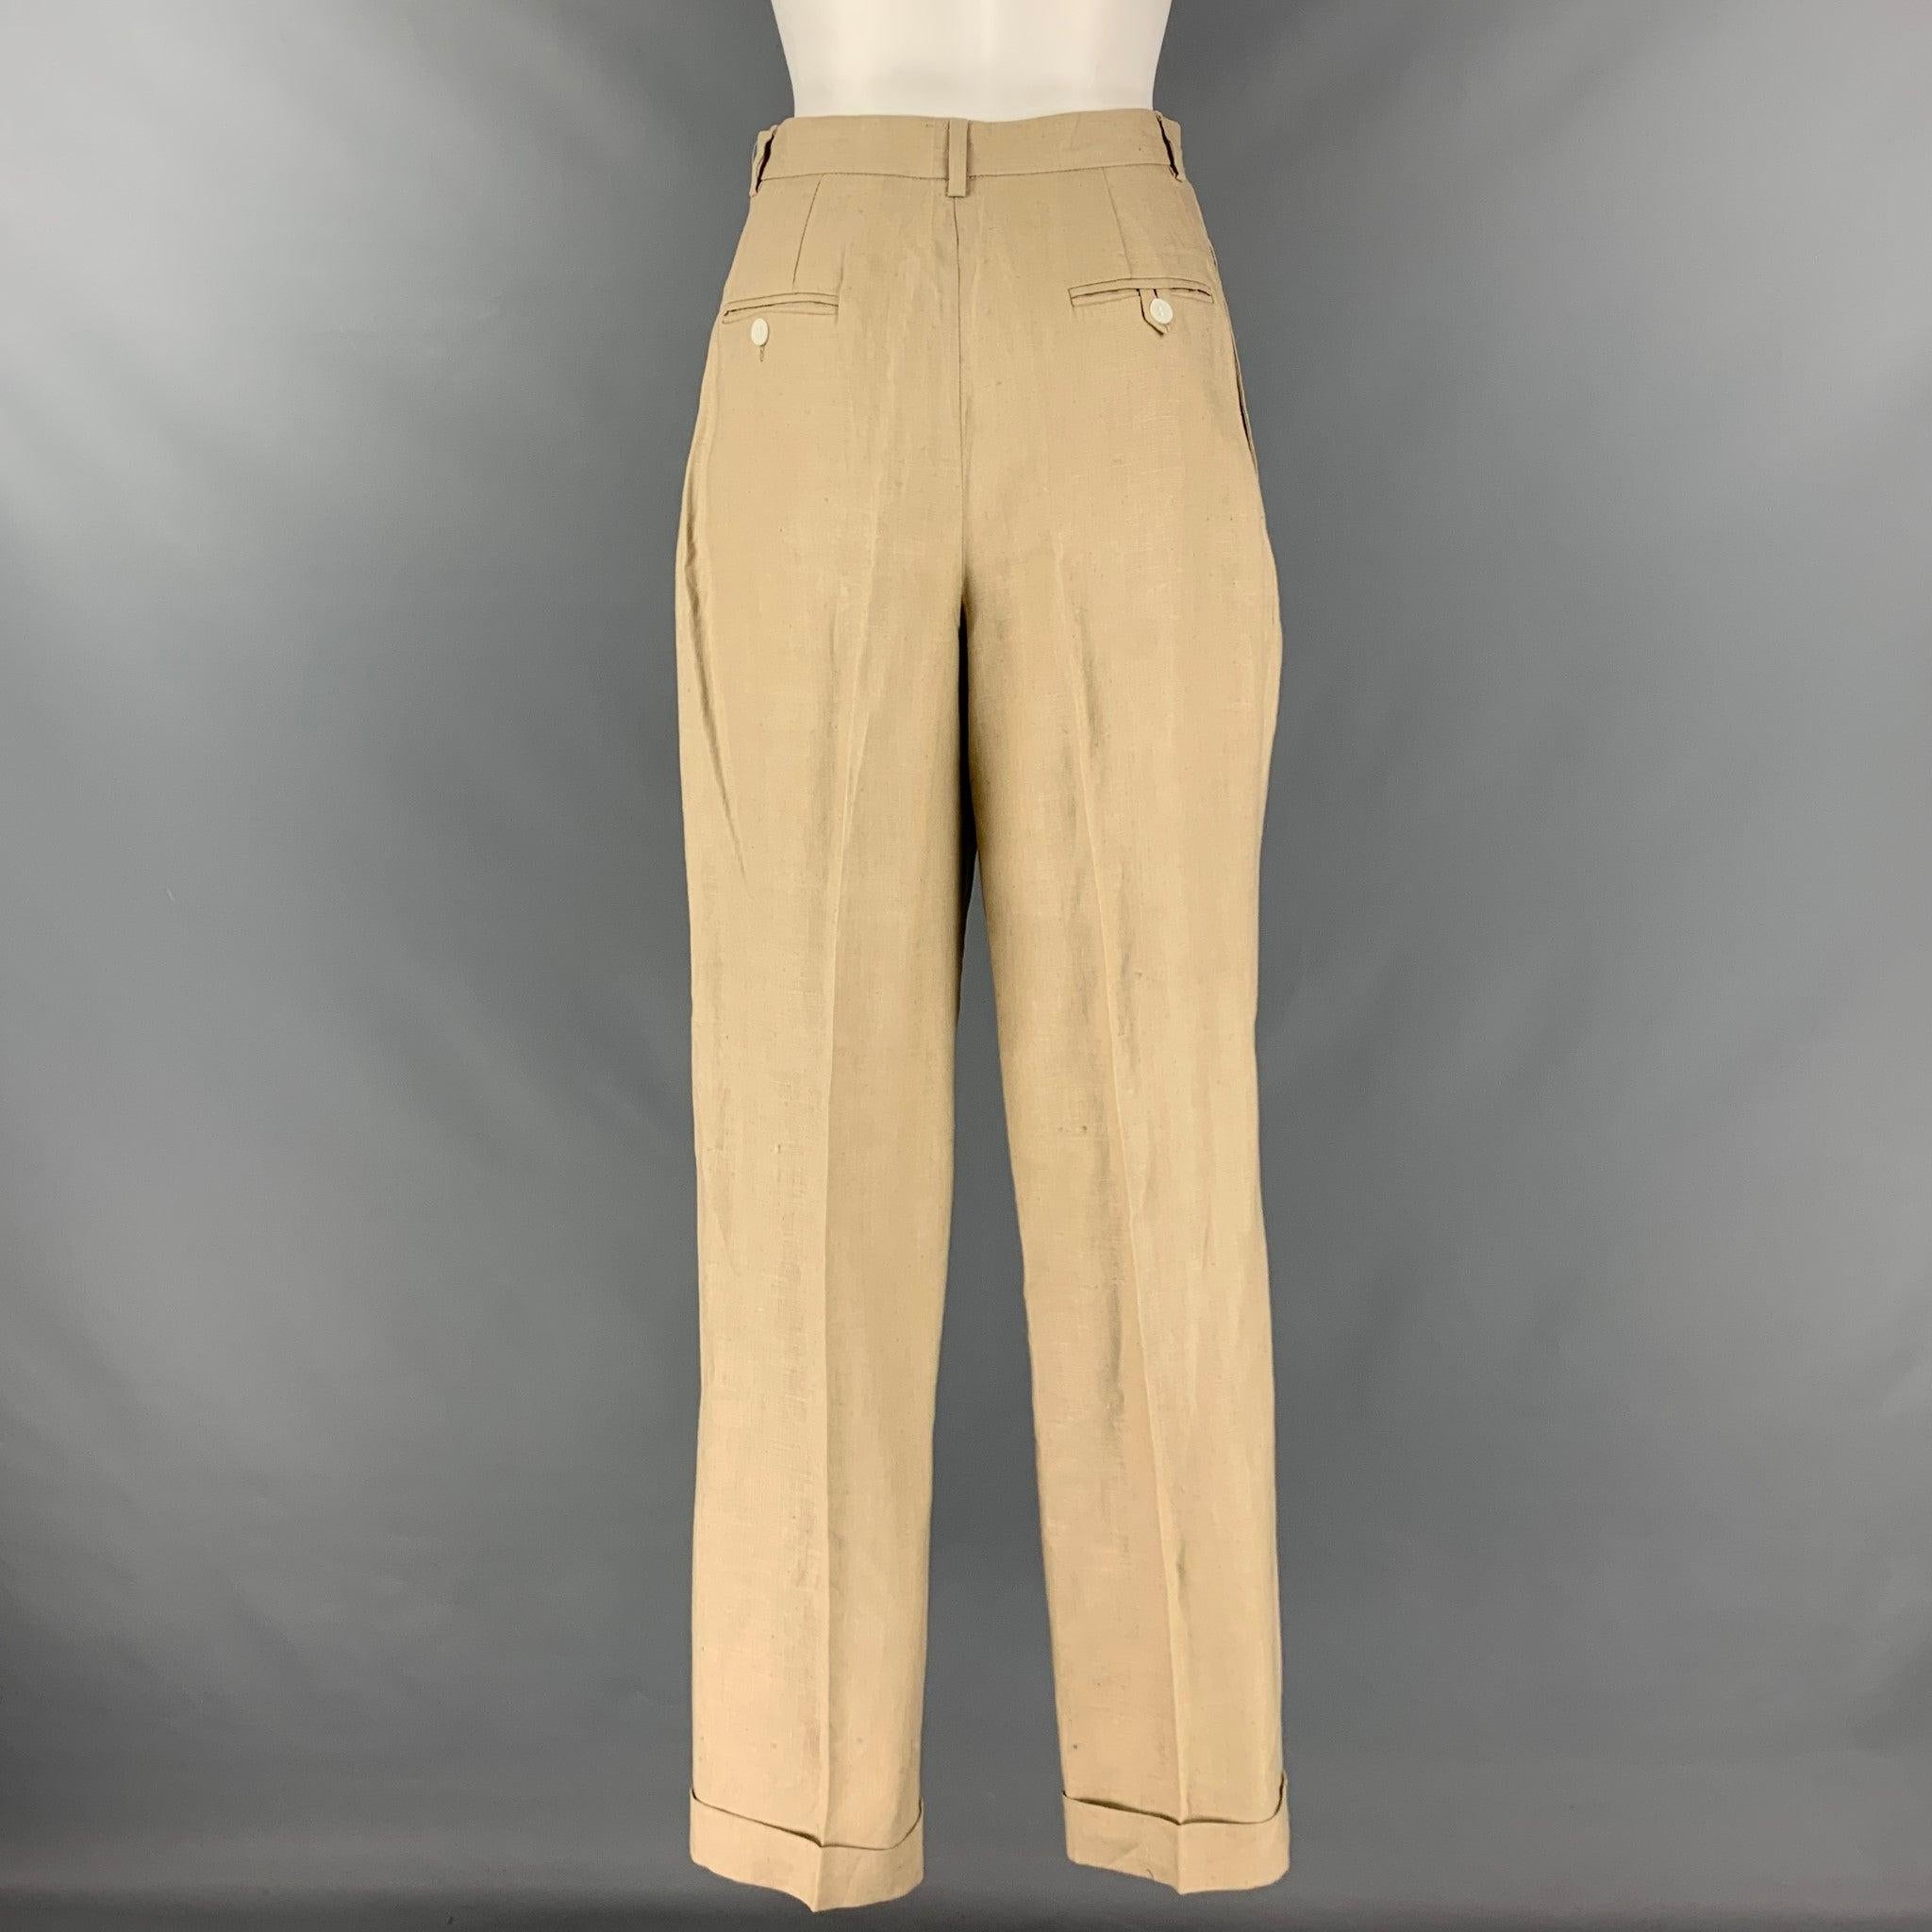 RALPH LAUREN Size 6 Beige Taupe Linen High Waisted Dress Pants In Good Condition For Sale In San Francisco, CA